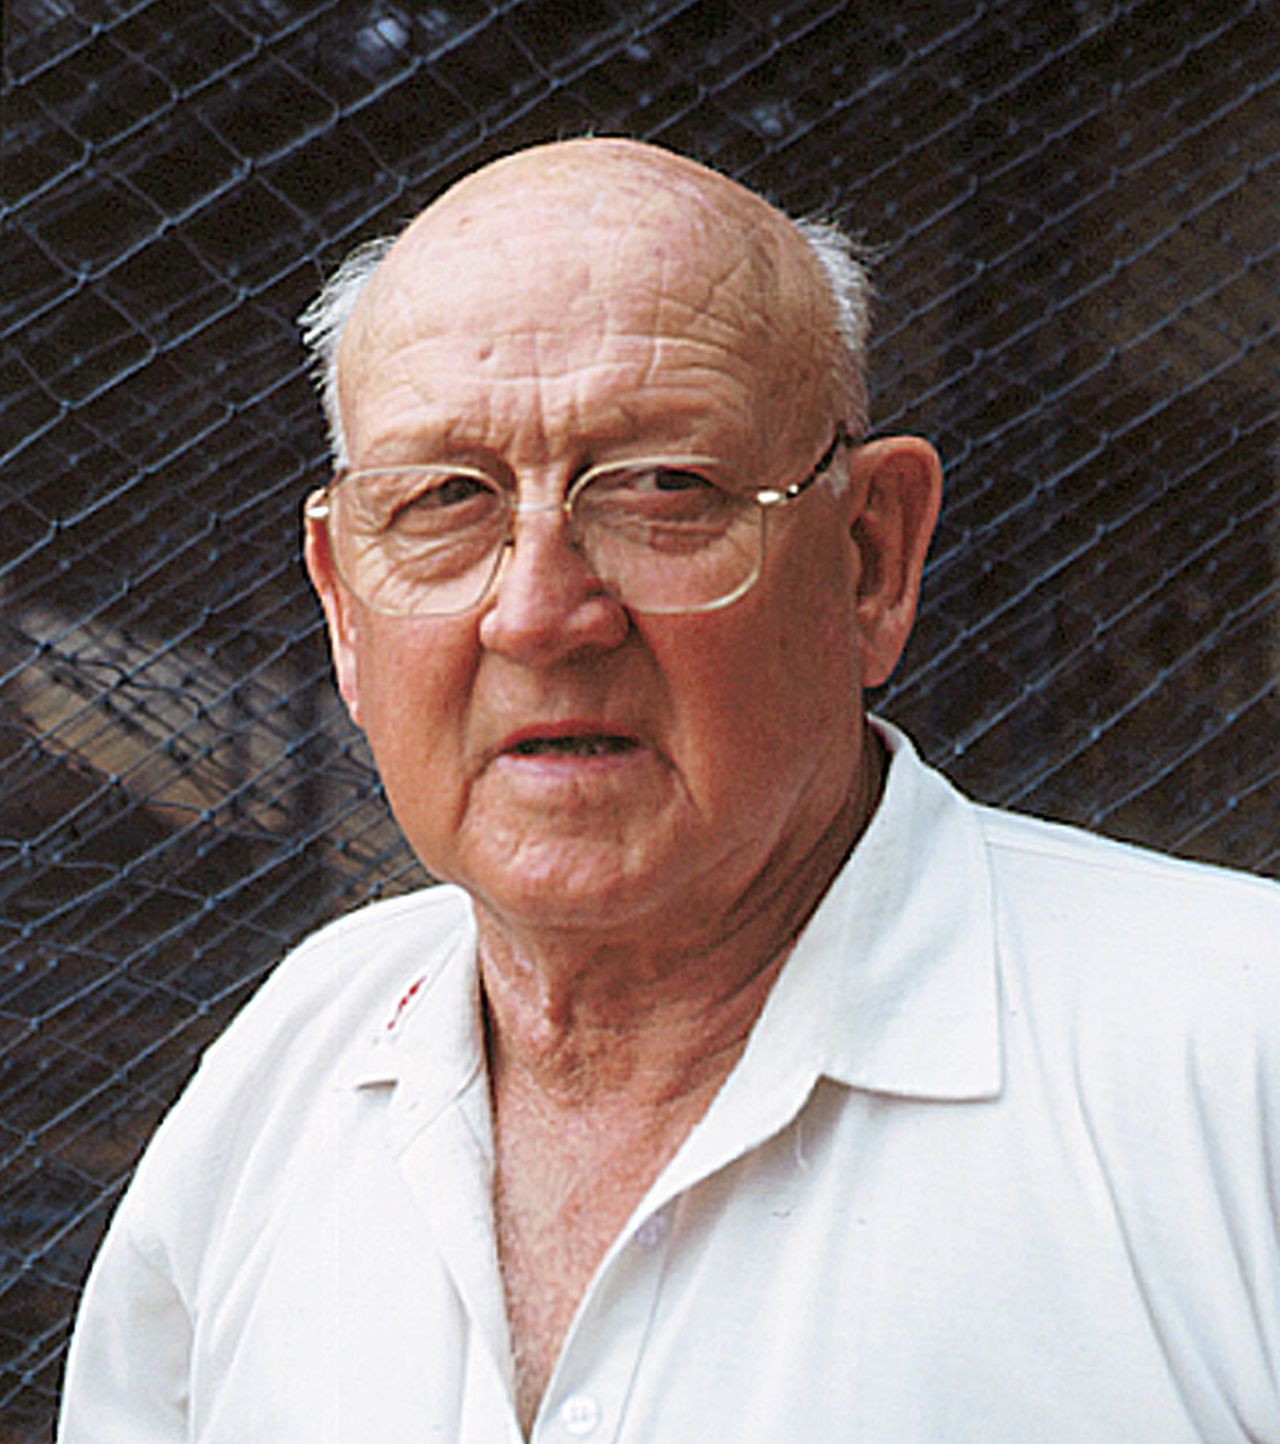 Frank Tyson at a camp in India, India, 2002